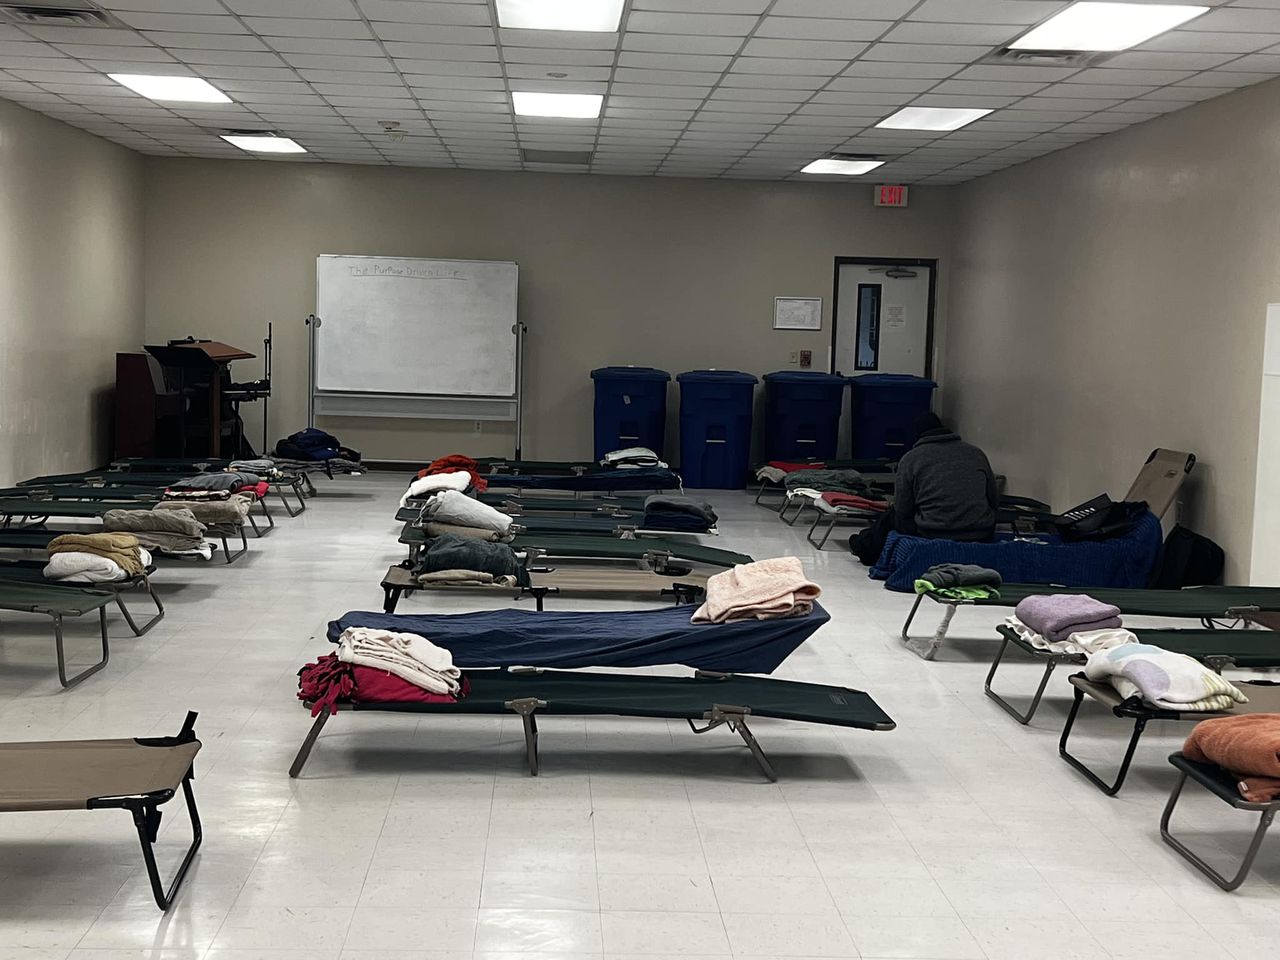 Jimmie Hale Mission takes over as warming shelter for Birmingham